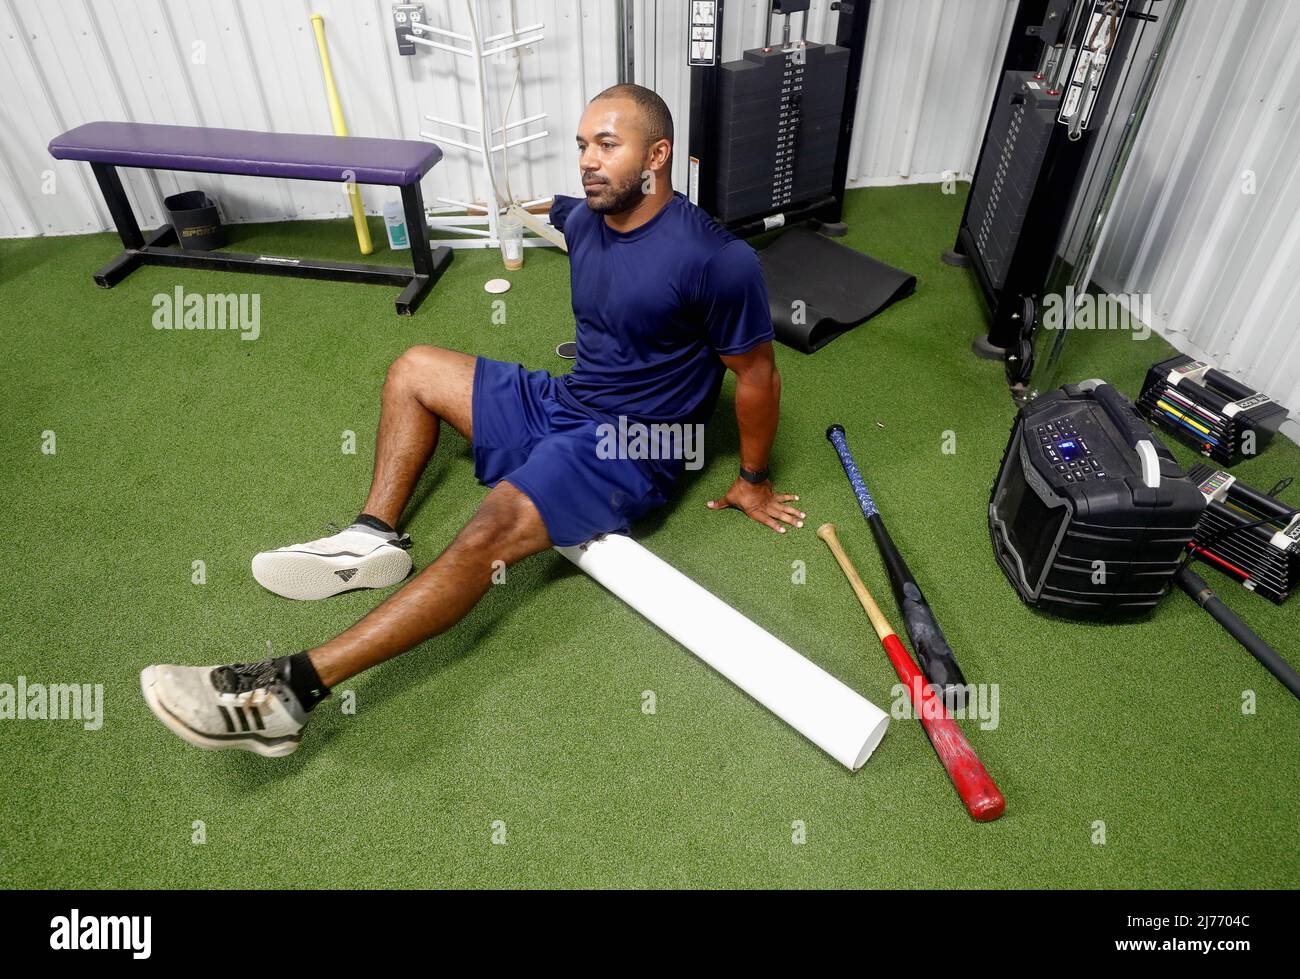 May 6, 2022, Geneva, IL, USA: May 6, 2022 Geneva, Illinois, USA:  Kane County Cougars outfielder NICK ANDERSON of Sugar Land, Texas stretches during batting practice the indoor facility at Northwestern Medicine Field. Anderson originally joined the Cougars in August 2021 after playing for the Fort Myers Mighty Mussels (Single-A affiliate of the Minnesota Twins) and the Houston Apollos  (Credit Image: © H. Rick Bamman/ZUMA Press Wire) Credit: ZUMA Press, Inc./Alamy Live News Stock Photo